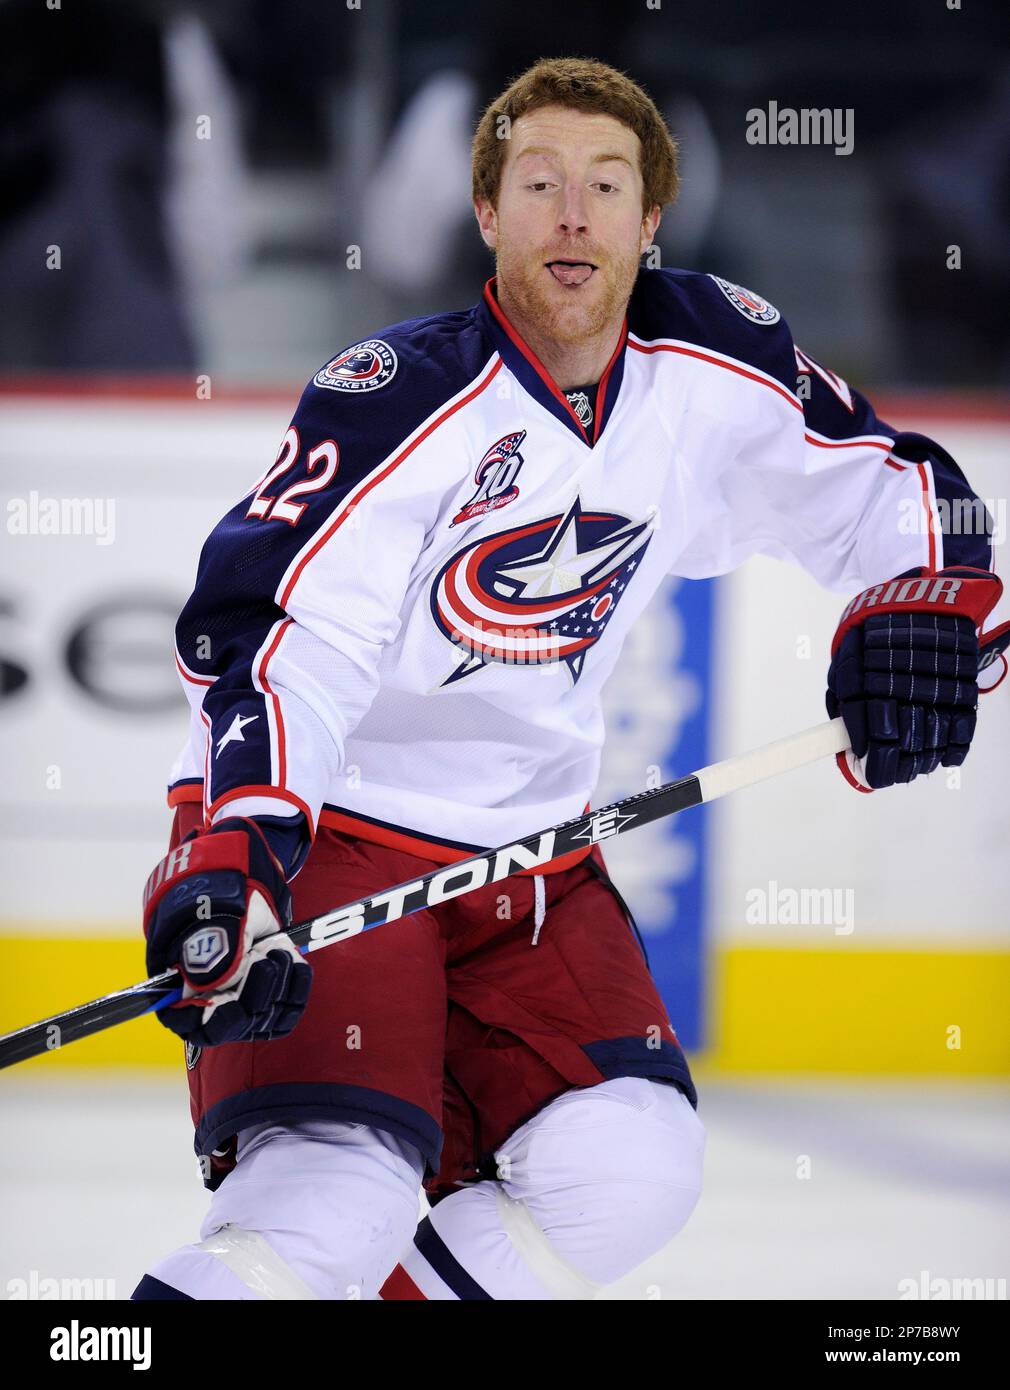 NHL player profile photo on Columbus Blue Jackets' Mike Commodore during a recent game in Calgary, Alberta. The Canadian Press Images/Larry MacDougal (Canadian Press via AP Images) Stock Photo